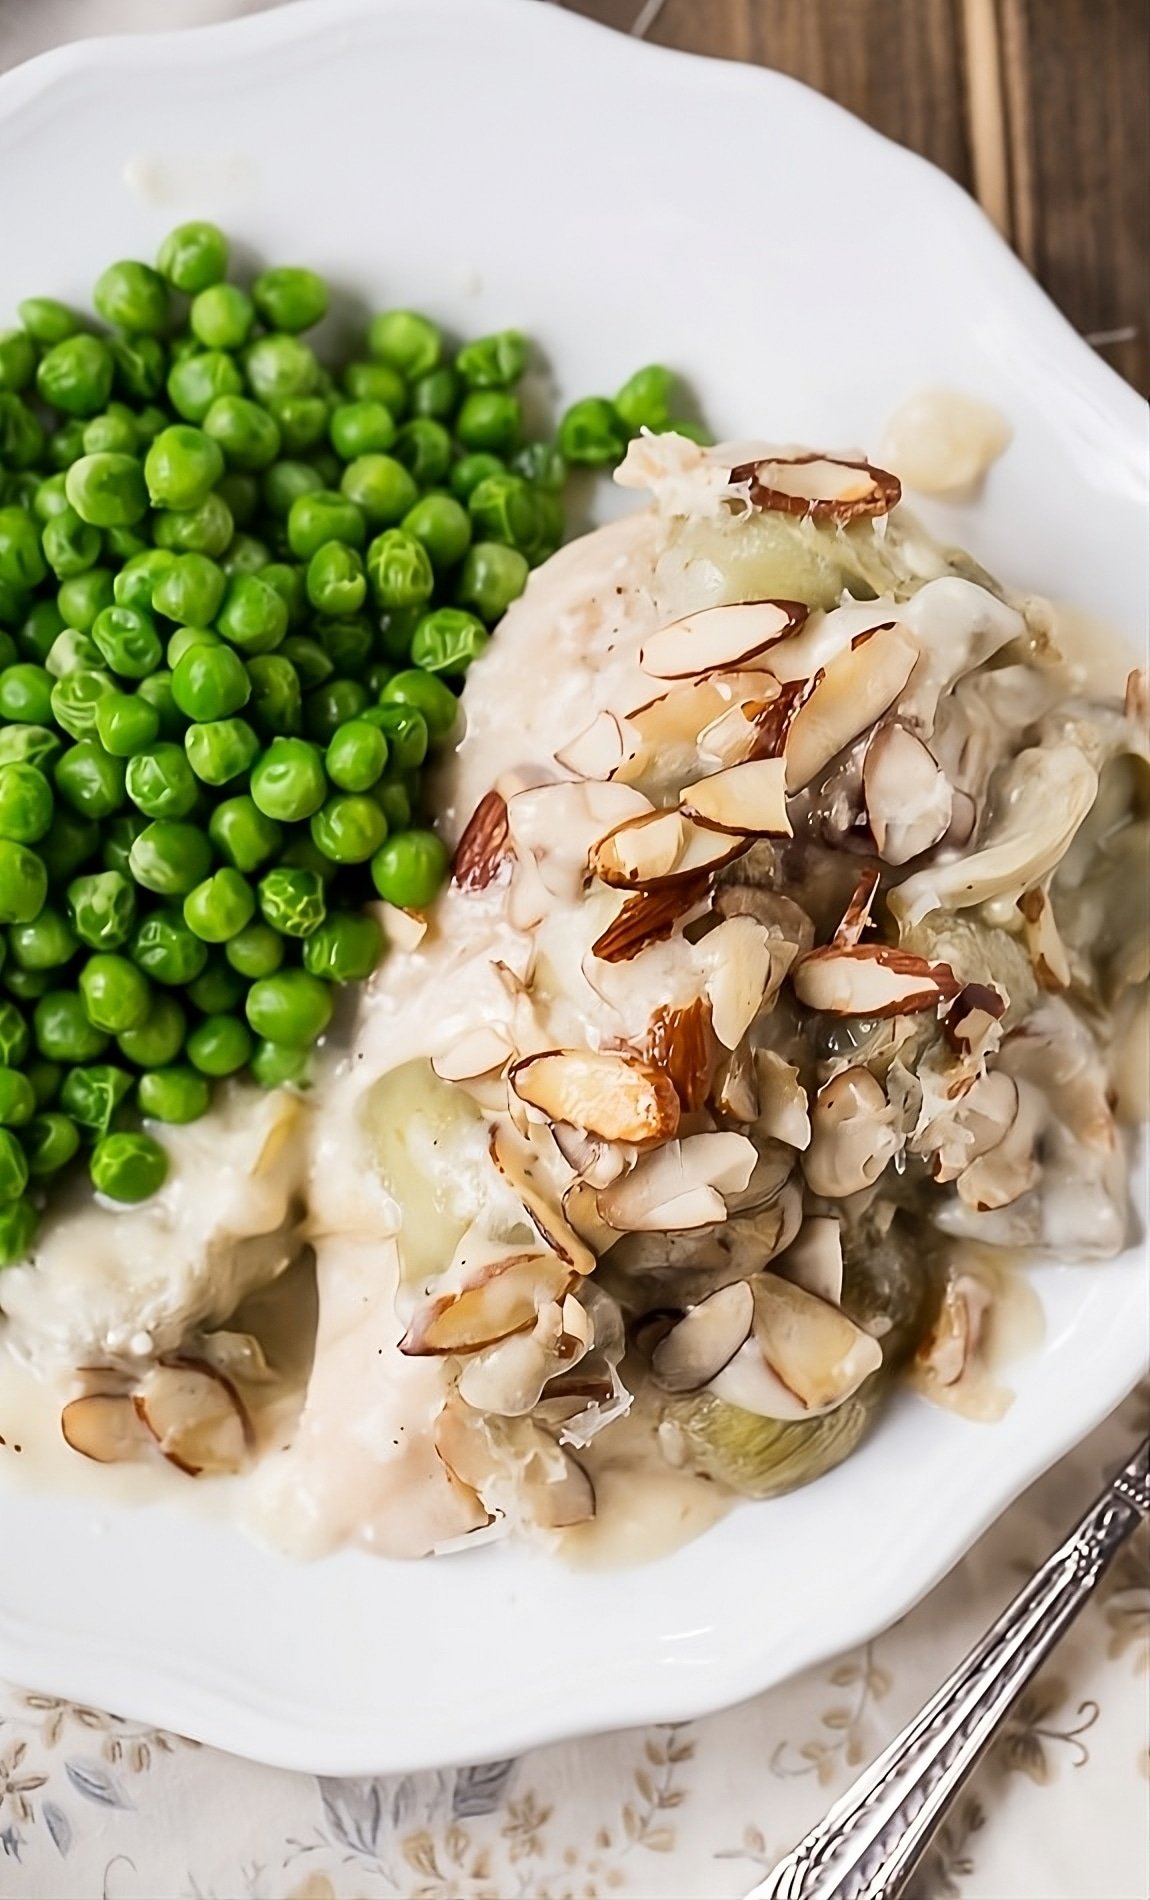 Chicken on plate with green peas.